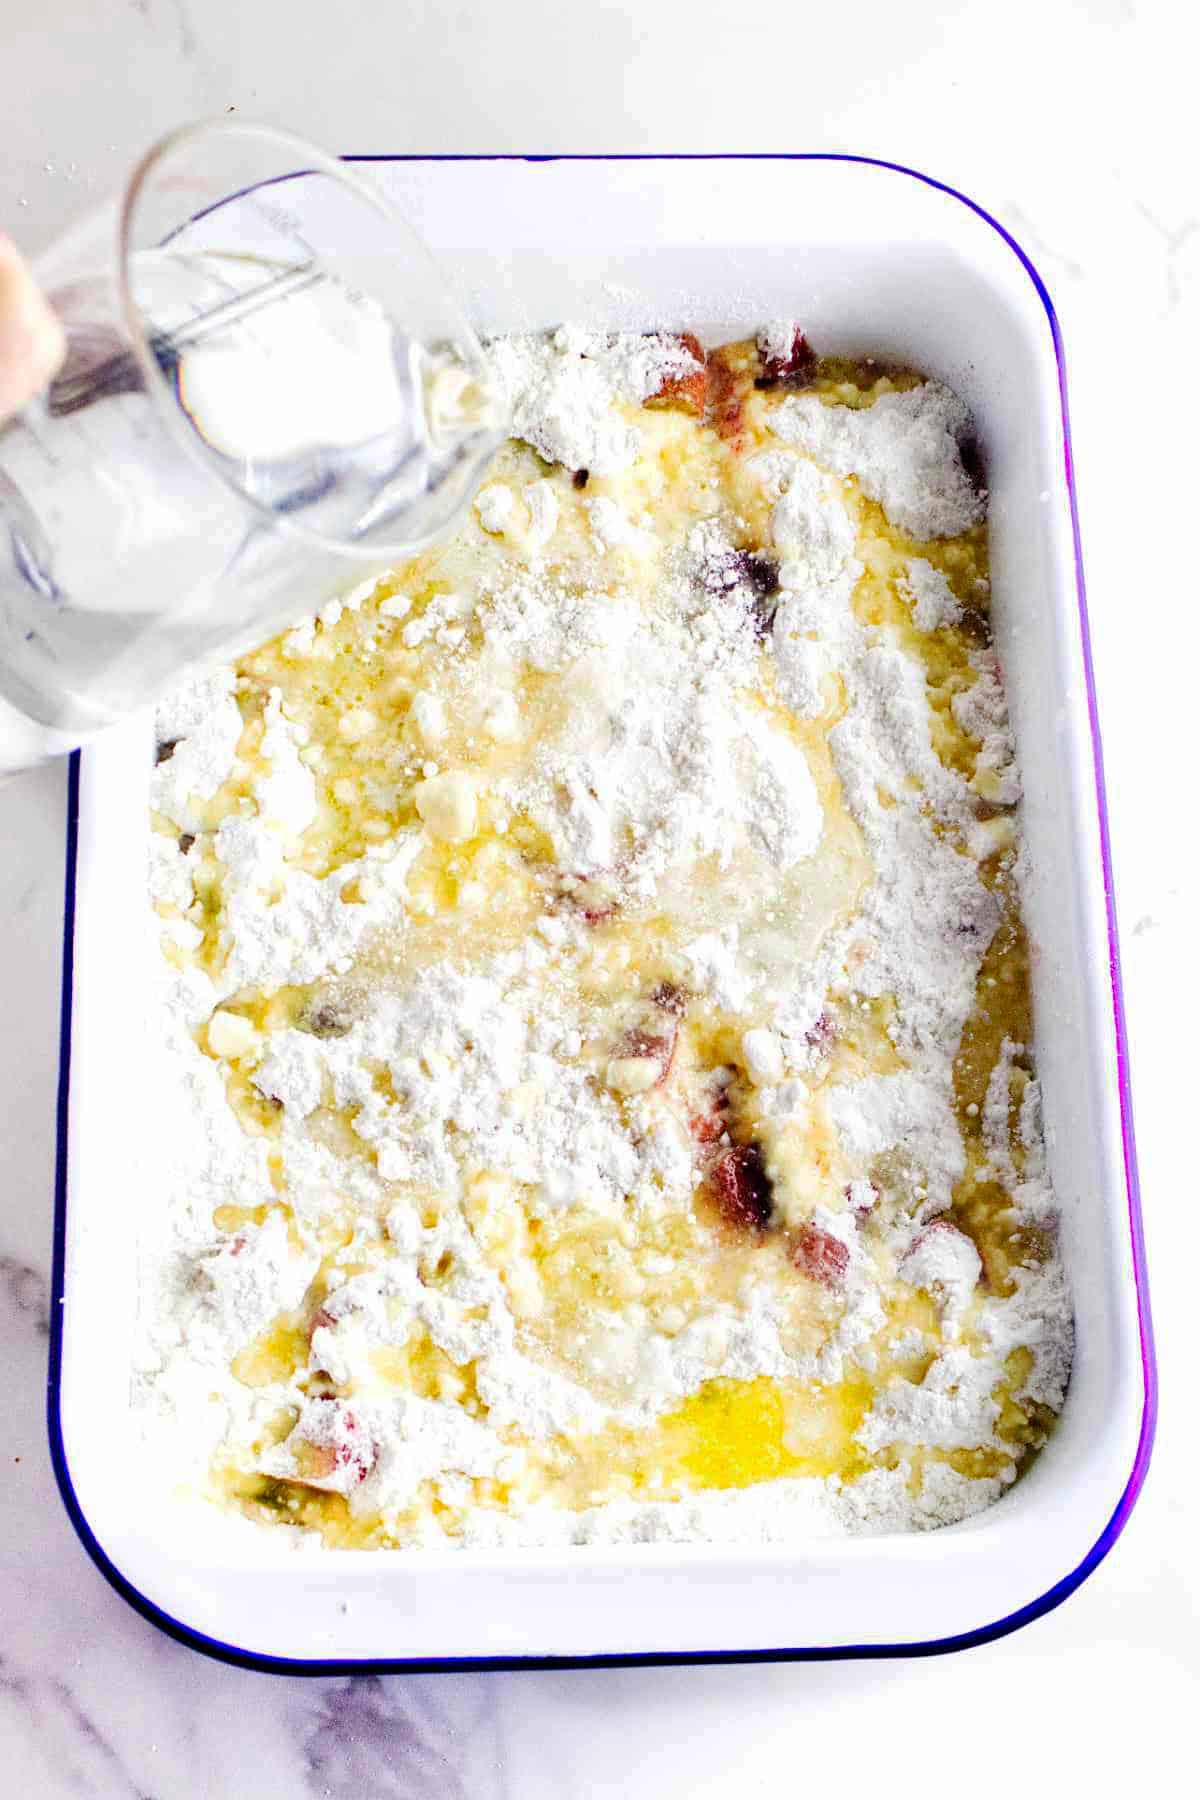 Butter and water drizzled over the cake mix in a baking dish.